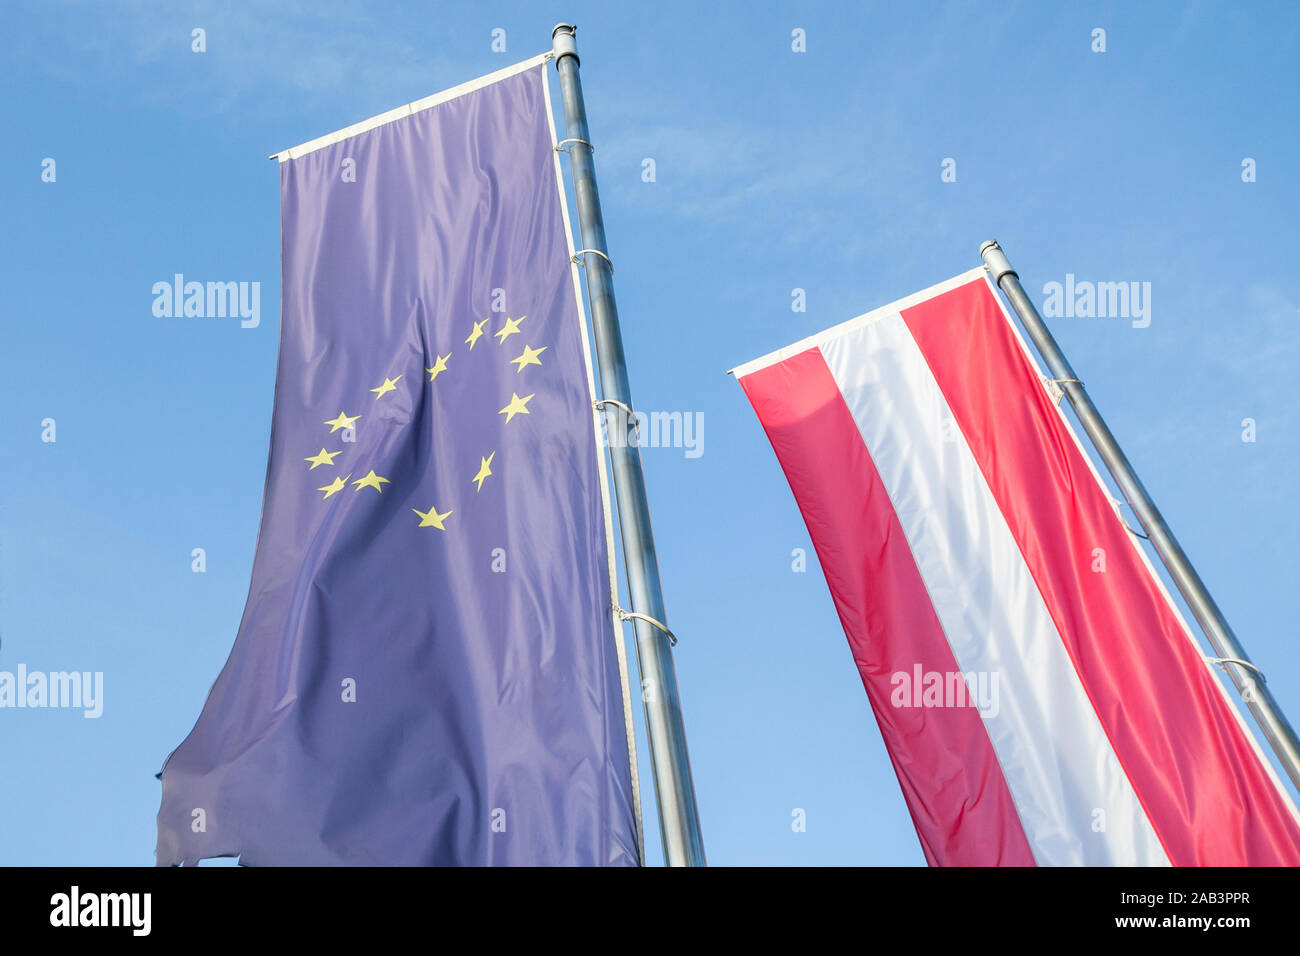 Flags of the European Union and Austria waiving together in the Austrian capital city, Vienna. Austria is a member of the EU since 1995 and a major ac Stock Photo